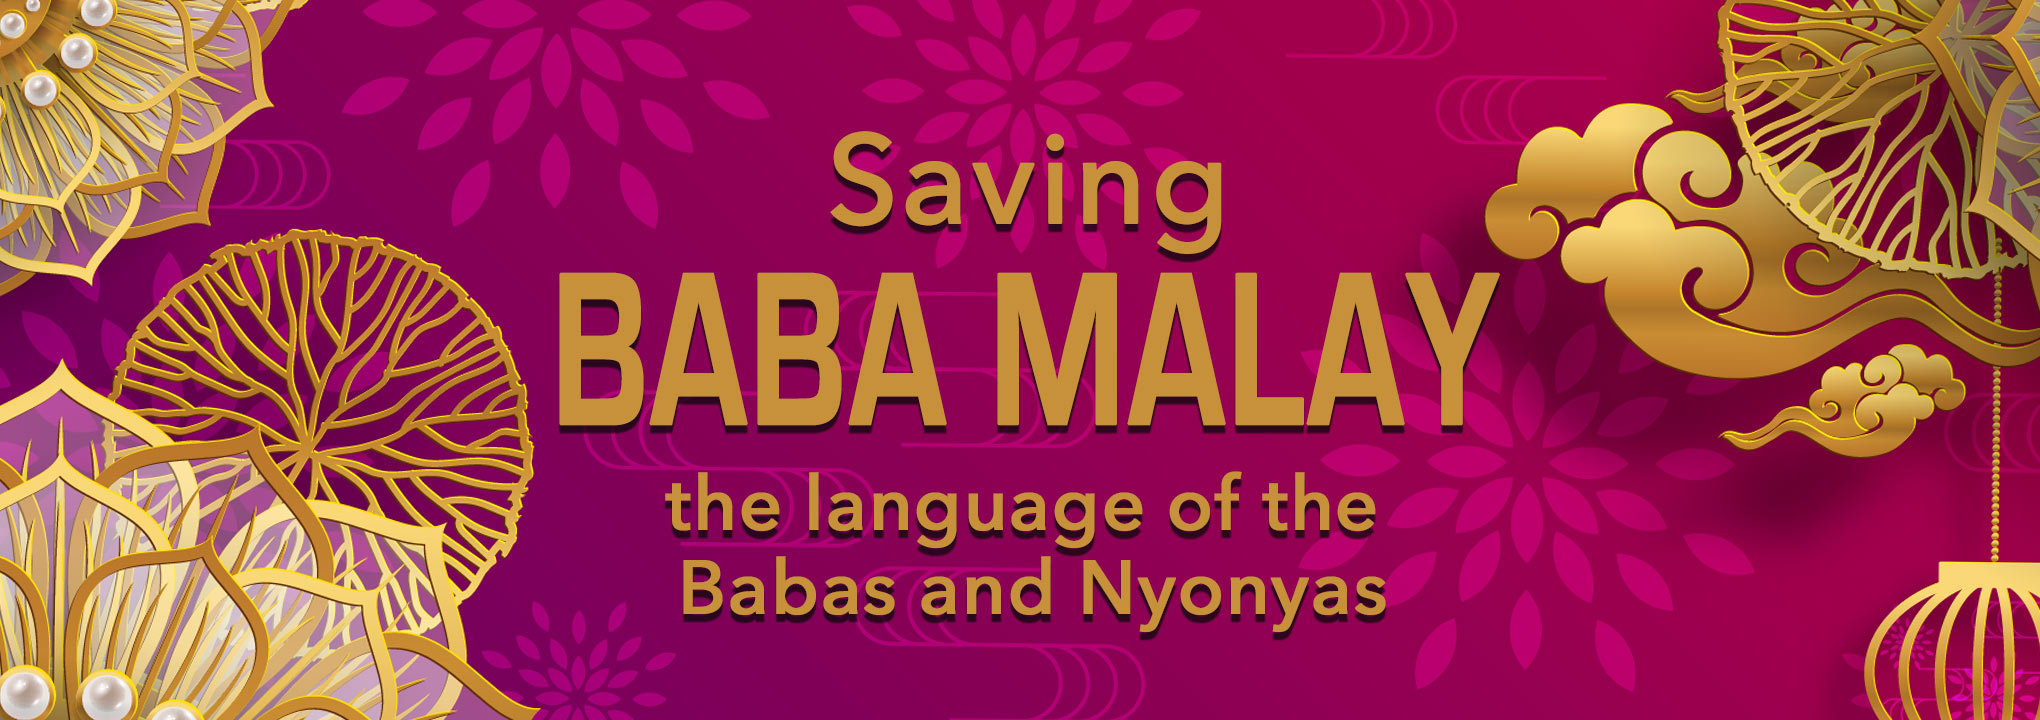 The Baba Malay Resource Site - Pink and Gold